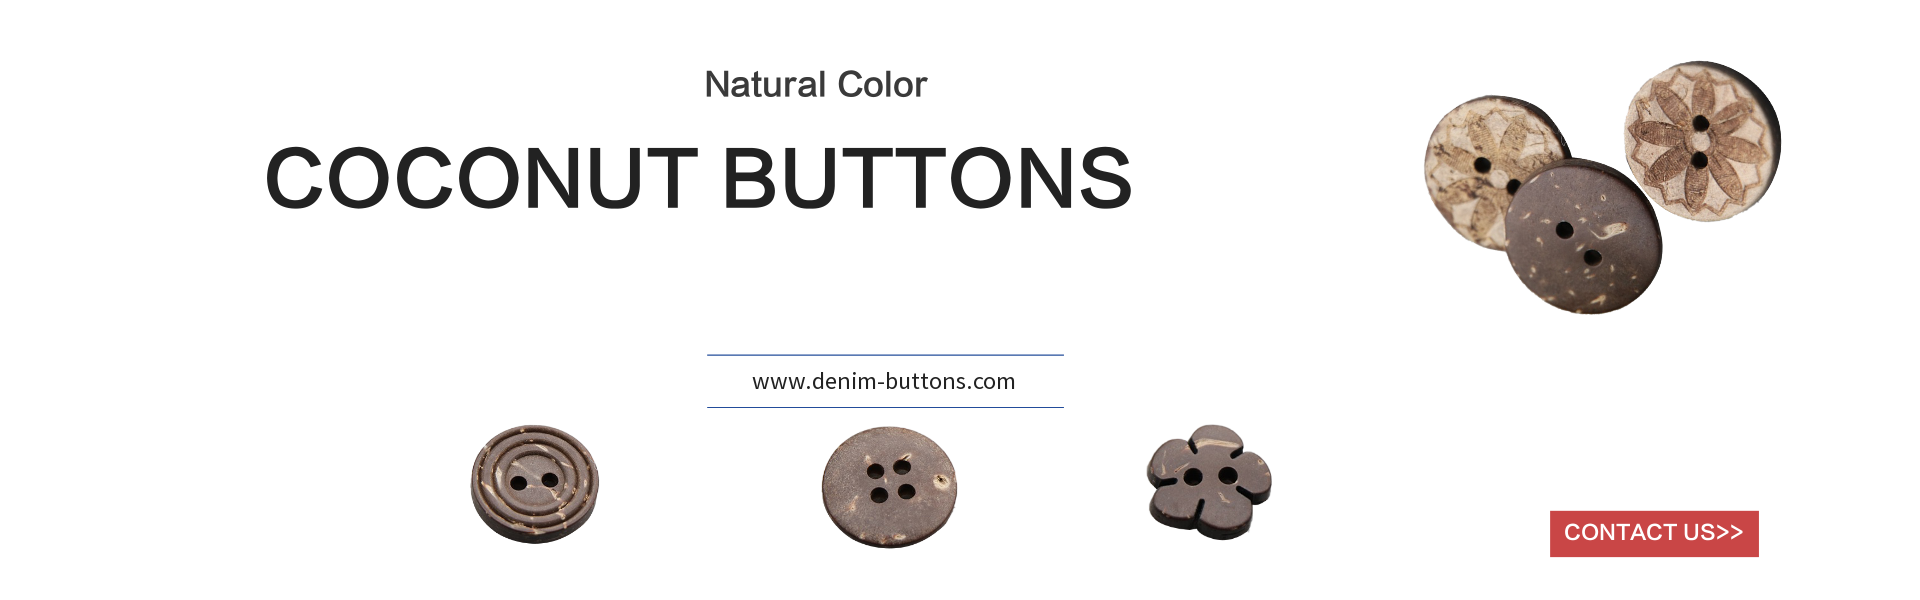 coconut buttons 2 hole or 4 holes